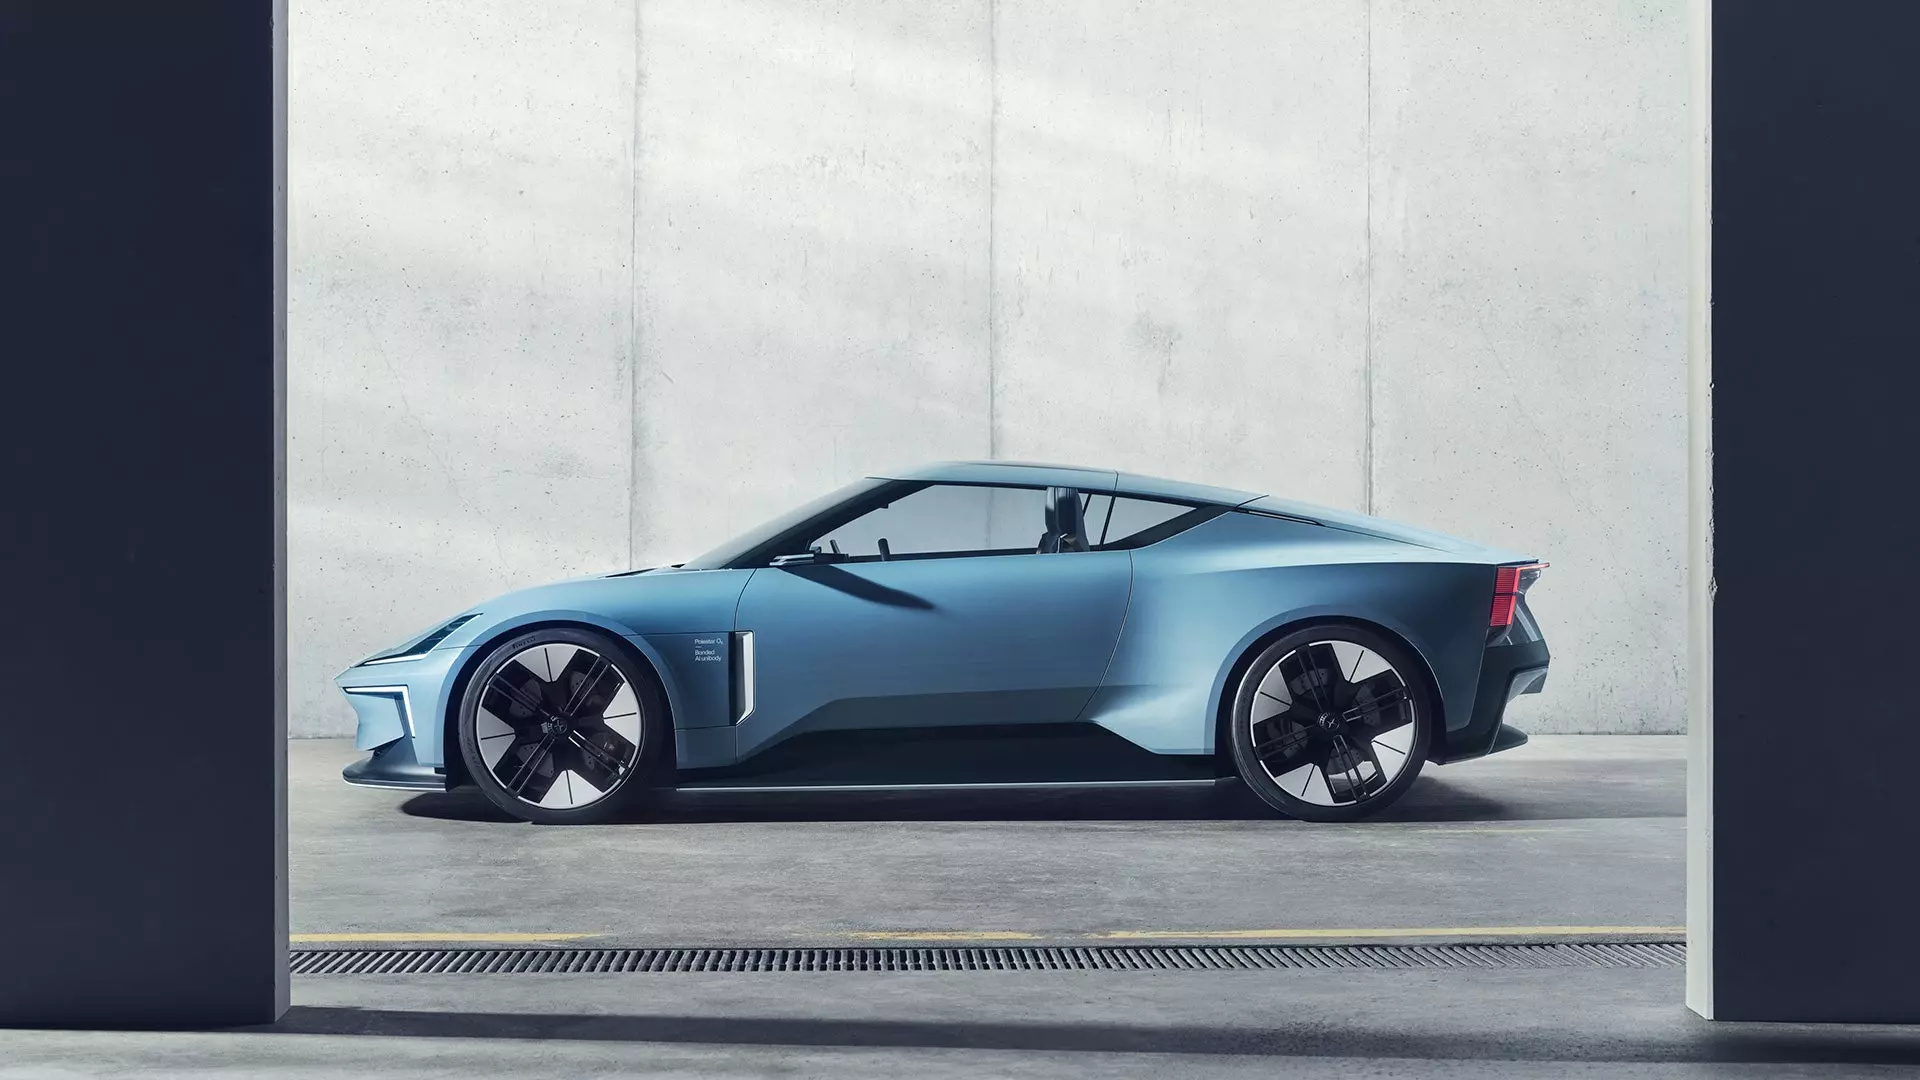 Without an Engine, the Polestar O2 Has Room for a Retractable Roof and a Drone | Autance